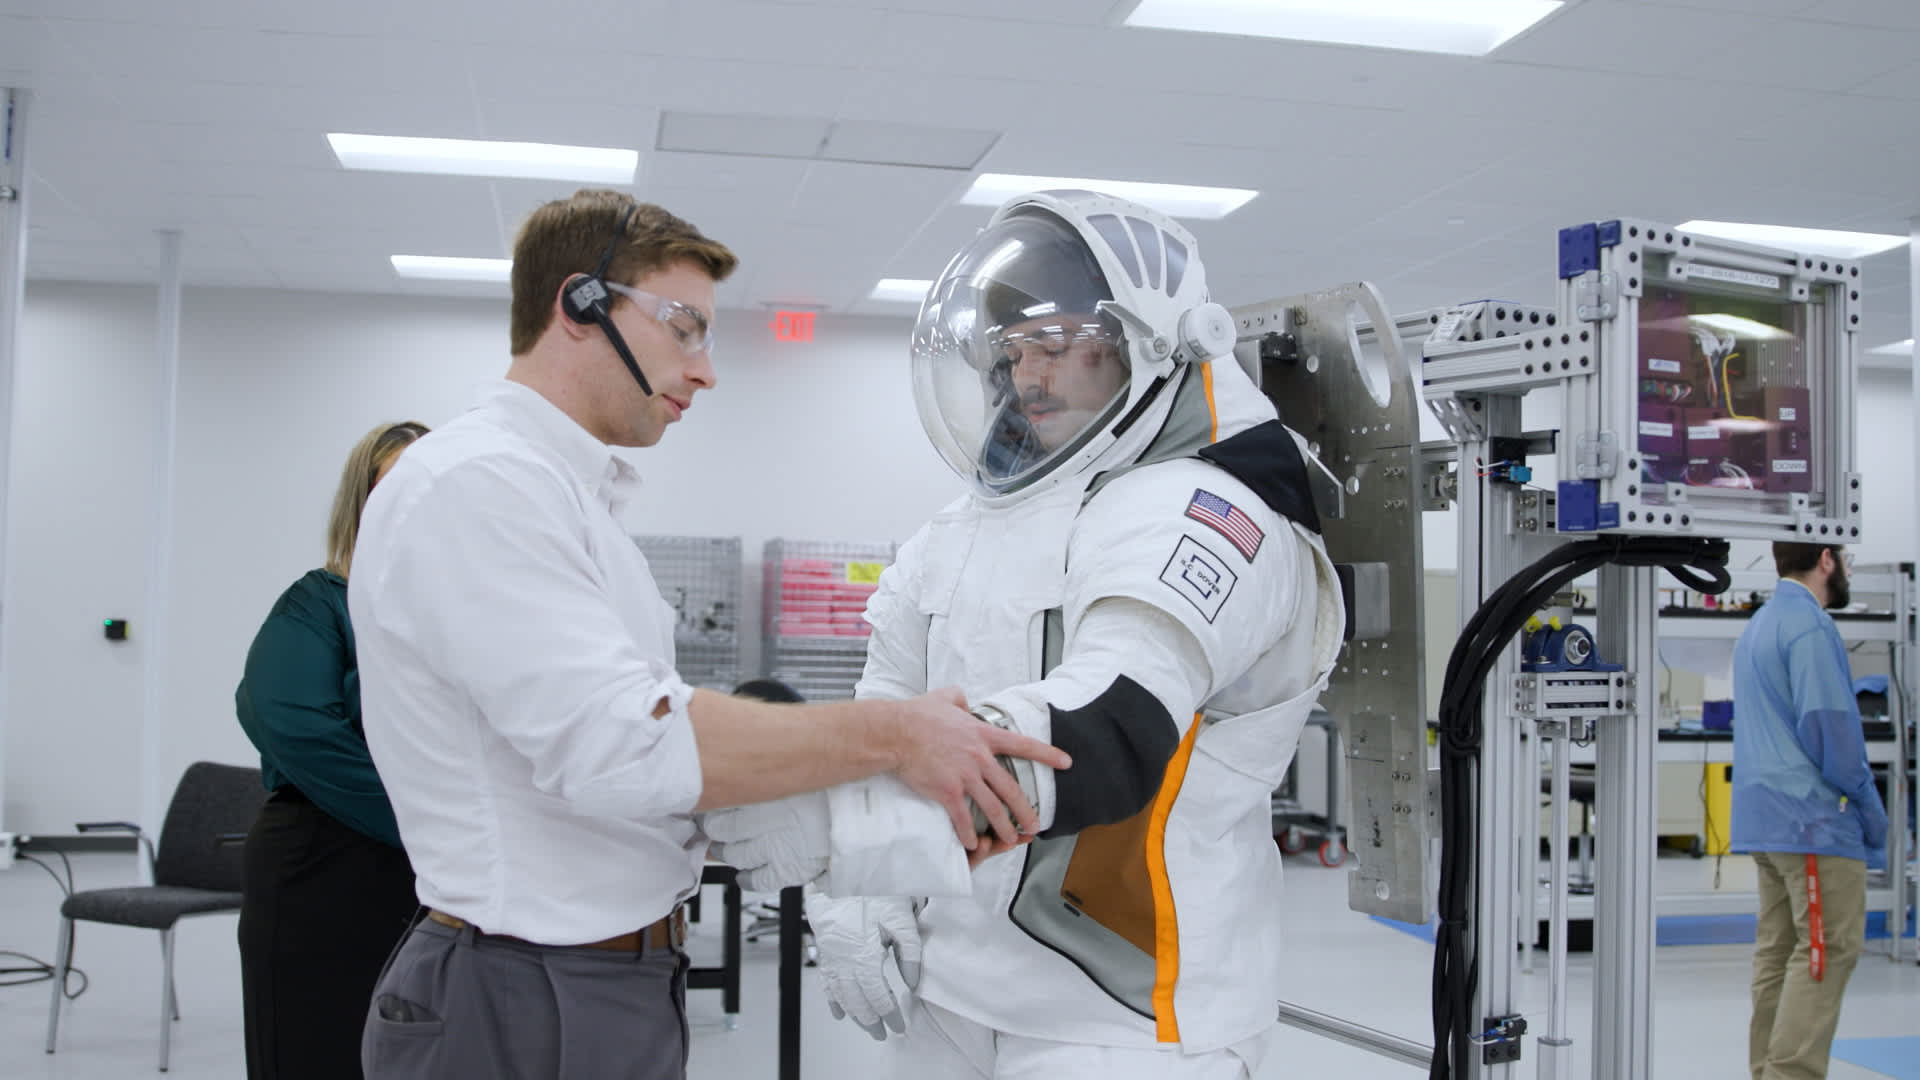 NASA’s $3.5 billion plan to redesign its aging spacesuits